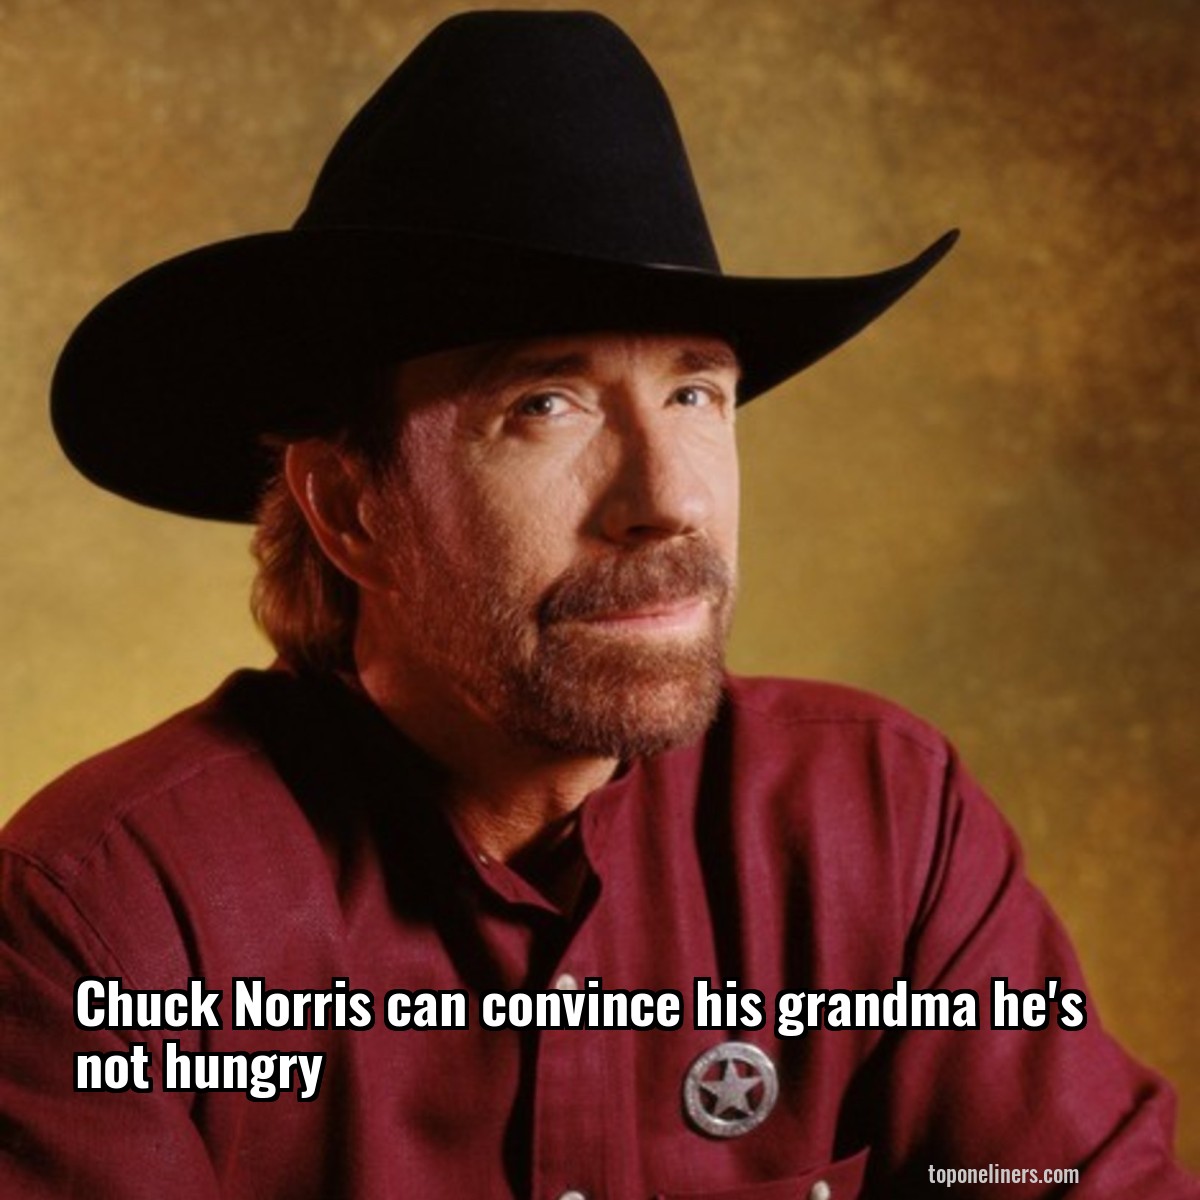 Chuck Norris can convince his grandma he's not hungry